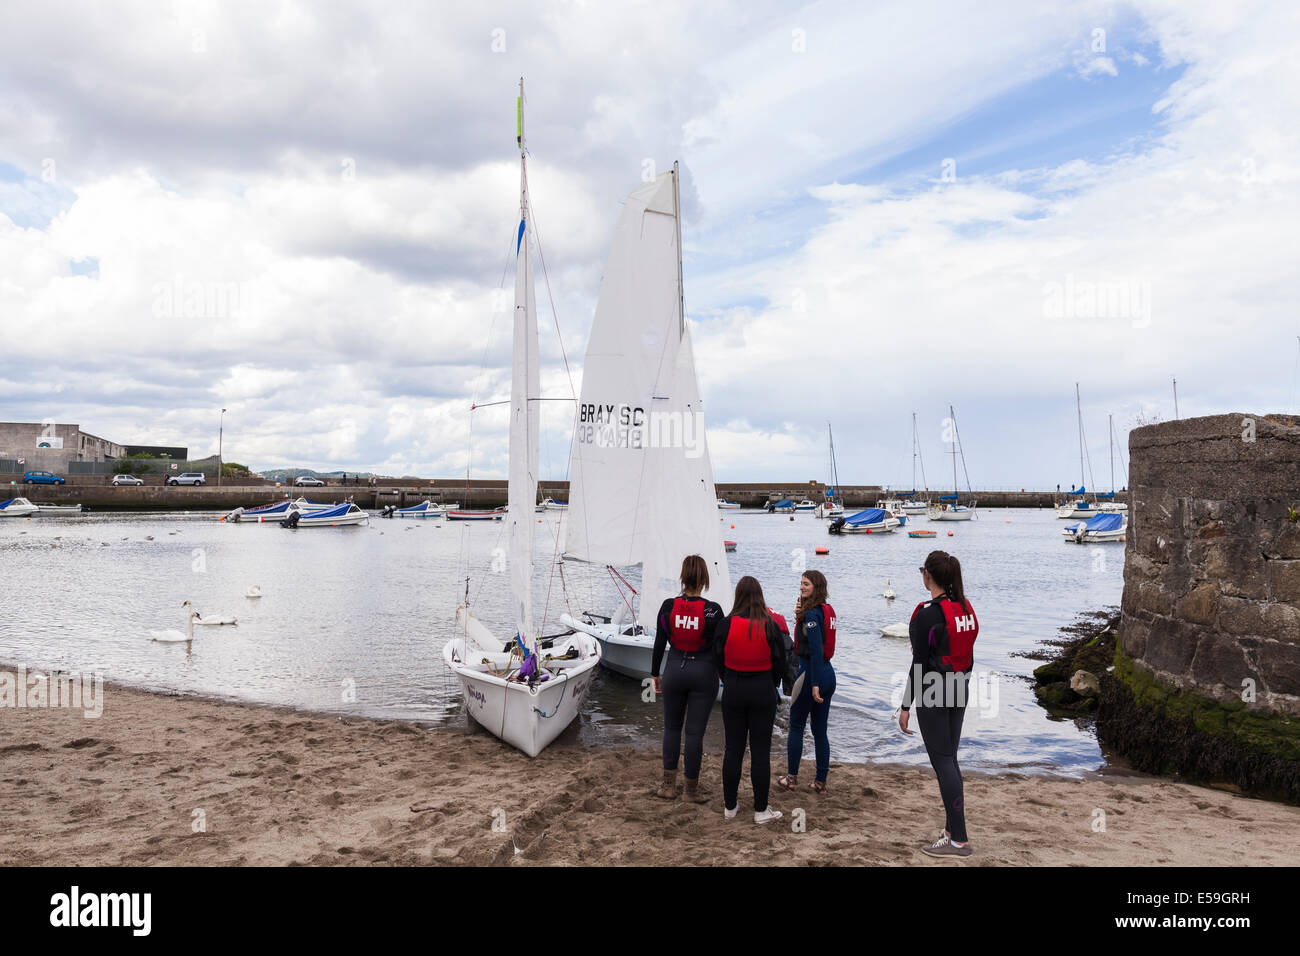 Sailing school students launching a sailboat for a lesson from Bray, County Wicklow, Ireland. Stock Photo